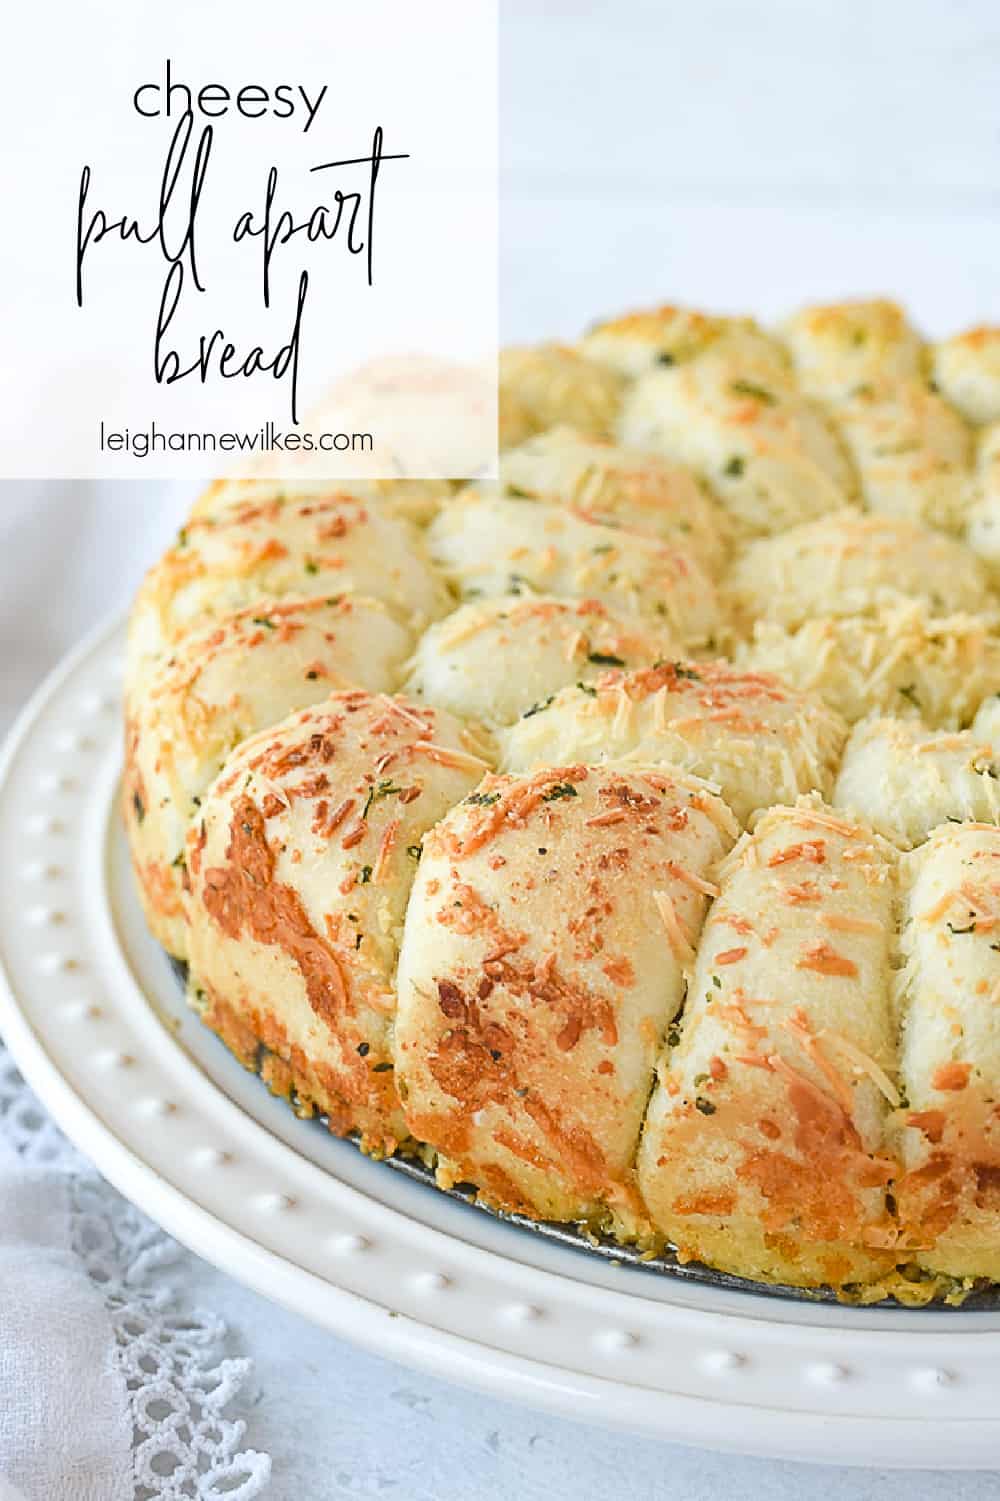 plate of cheesy pull apart bread